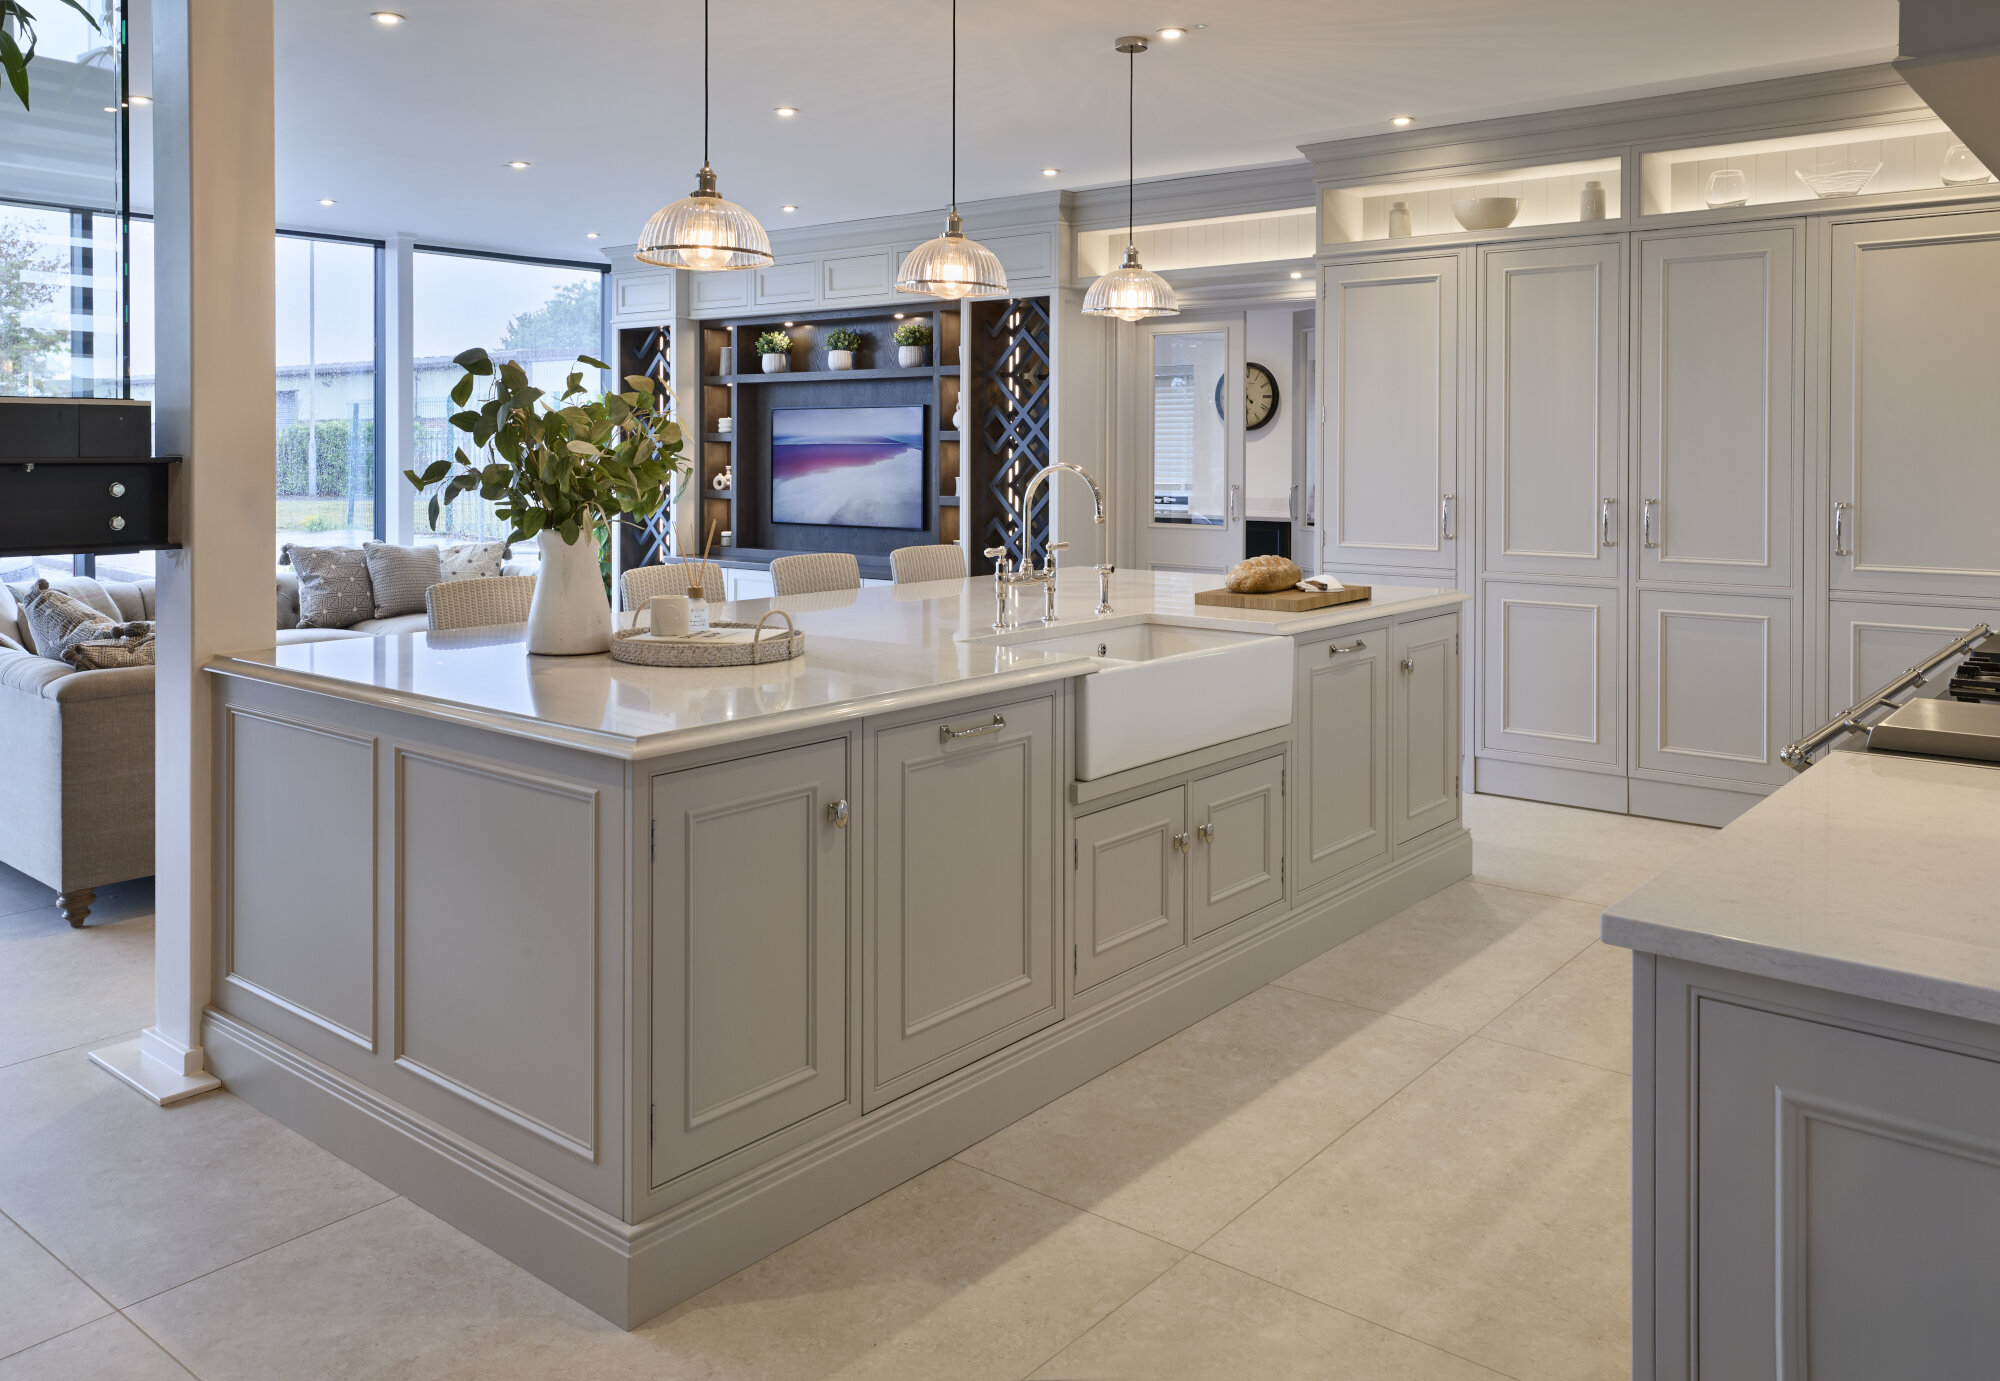 This Bespoke Kitchen Design is on display in our showroom near Melton Mowbray